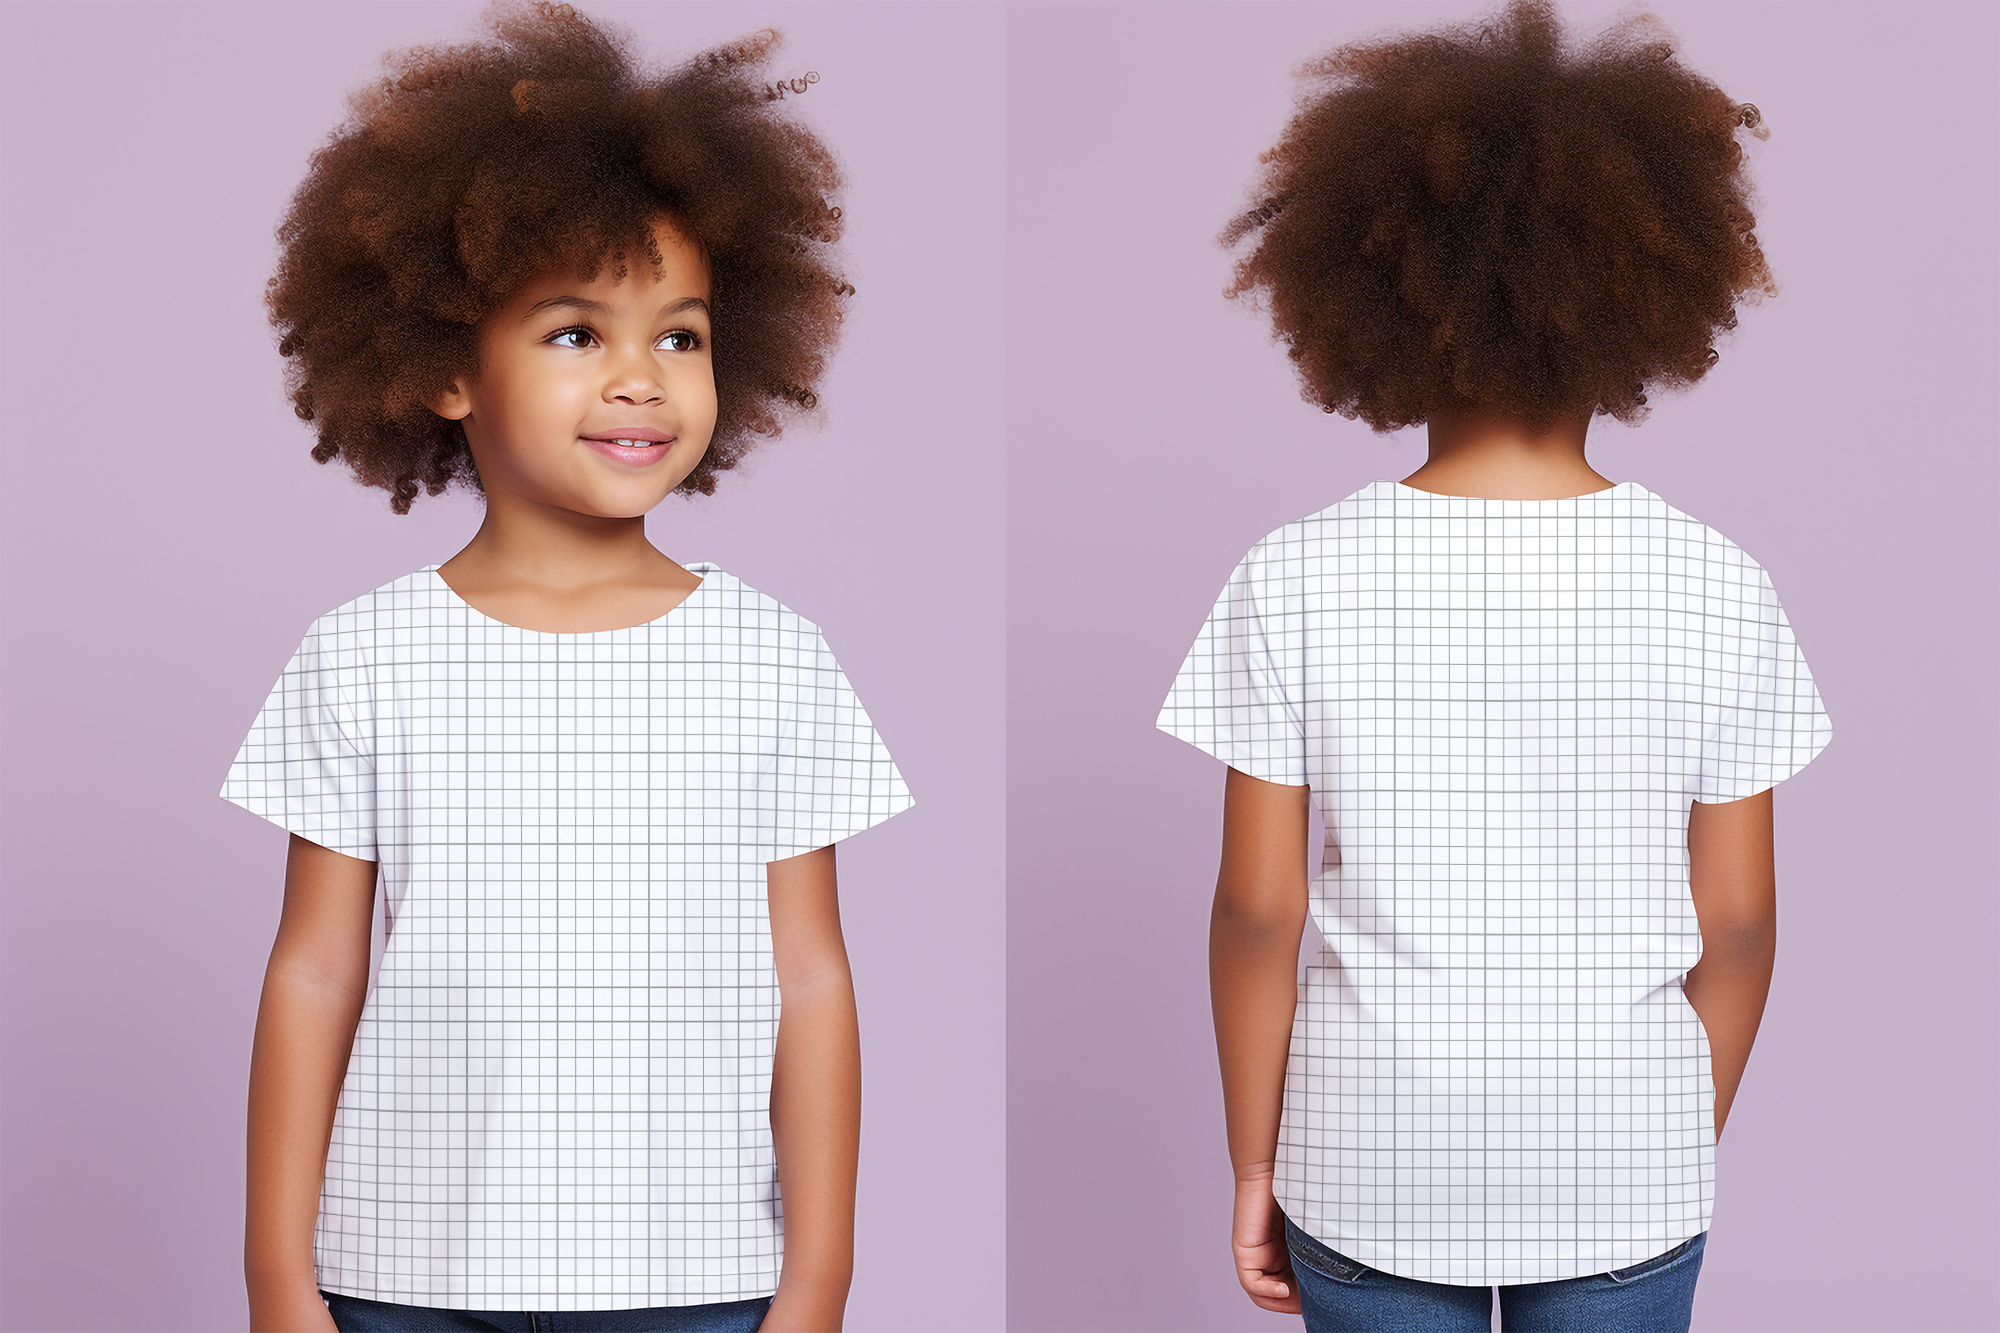 African baby wearing t-shirt mockup front and back view grid